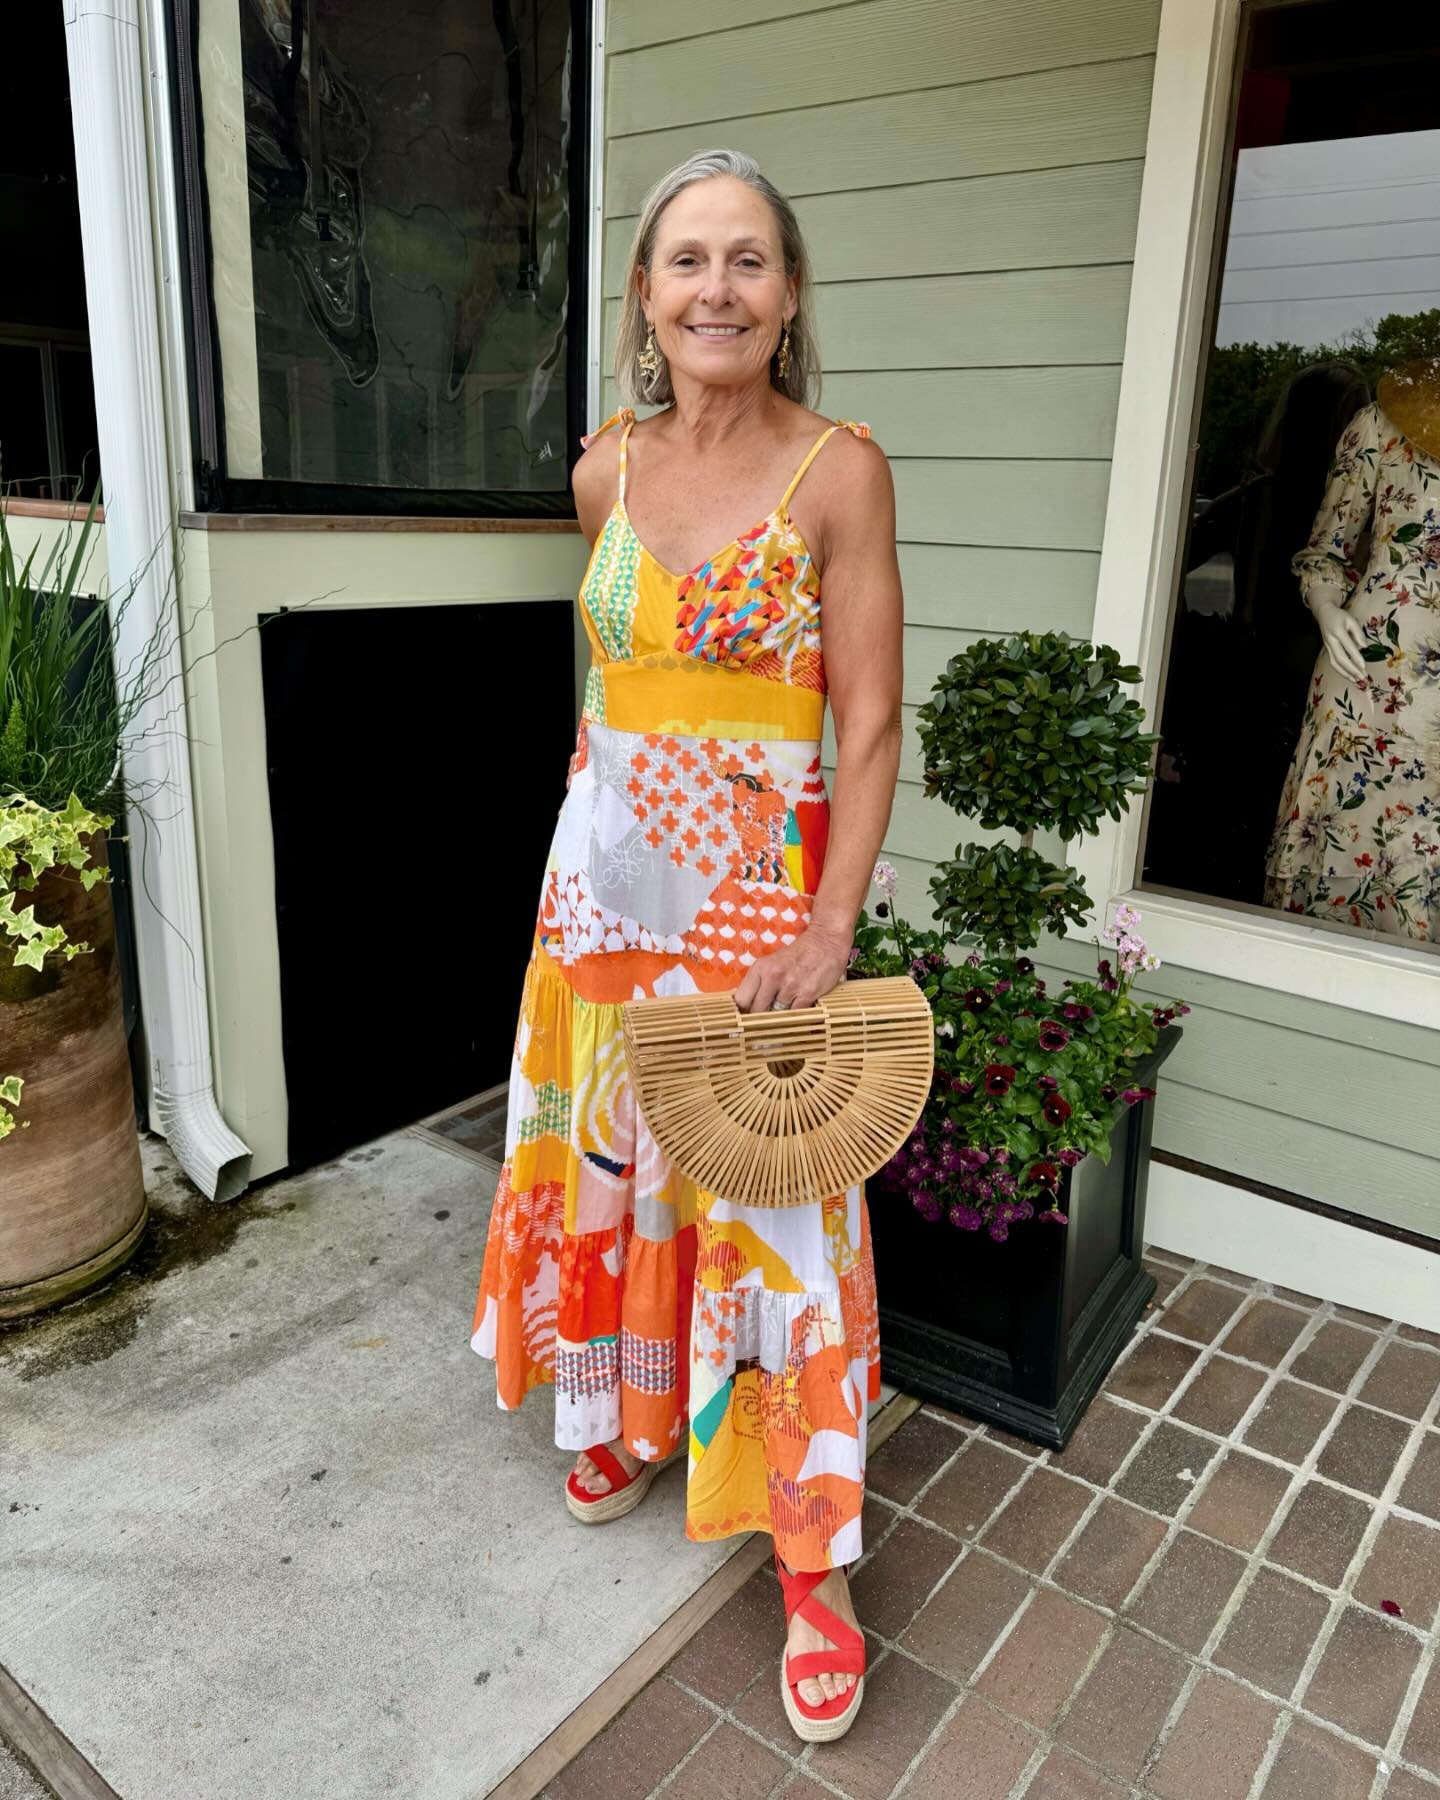 The most perfect Saturday OOTD. Come find it here ⚡️🍊✨🩷

#consigningwomen #cw #consignment #consign #store #shop #bestshop #fashion #style #looks #lookbook #styling #fashionable #ootd #spring #dress #charleston #mtp